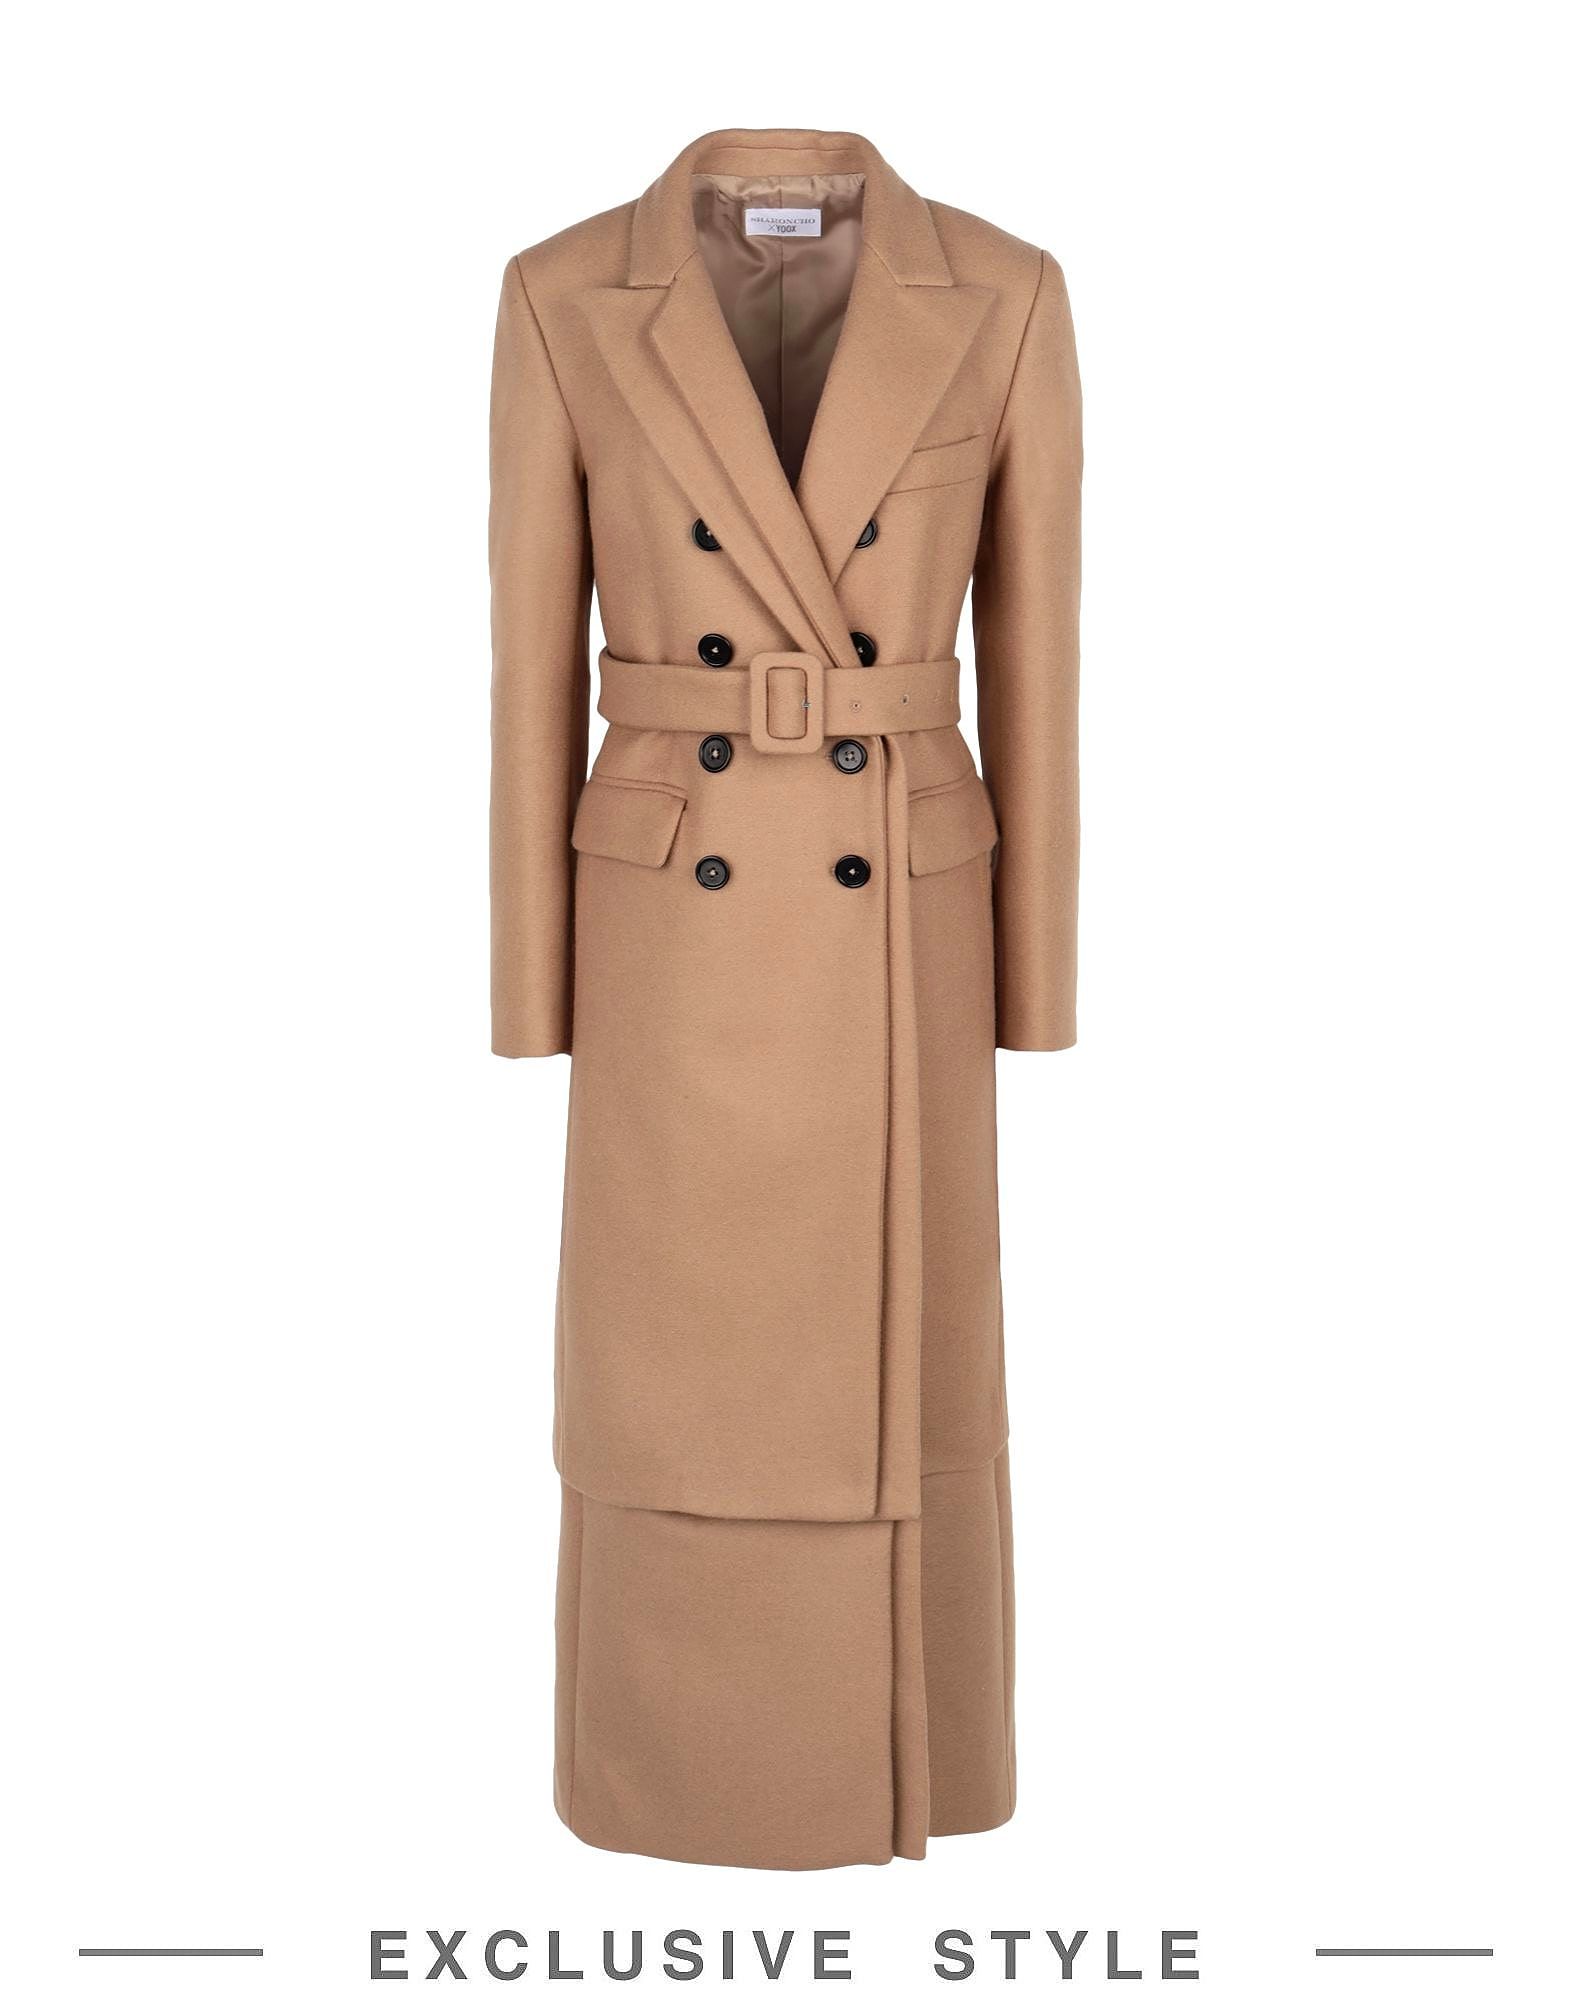 42 Of The Best Camel Coats To Buy Now